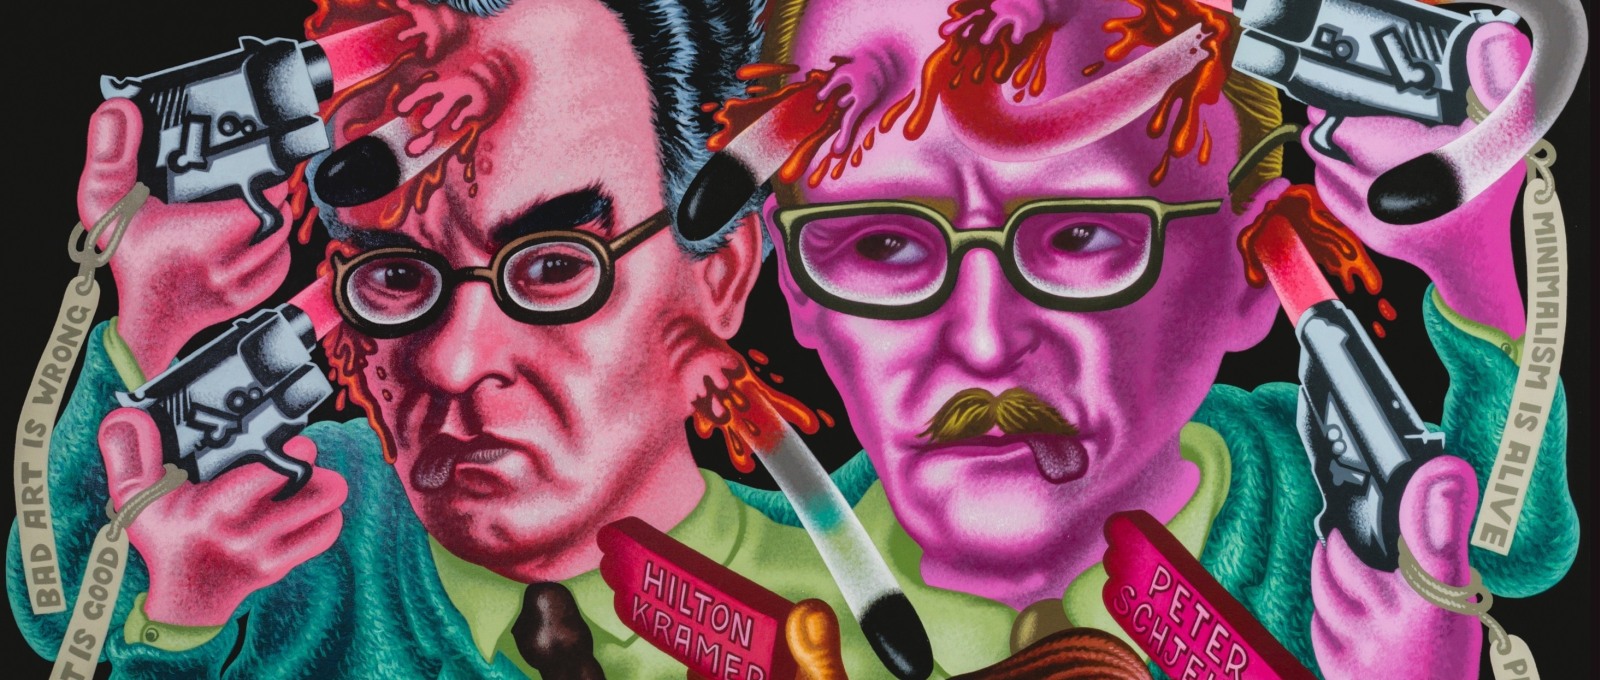 Detail of painting by Peter Saul titled Art Critic Suicide form 1996